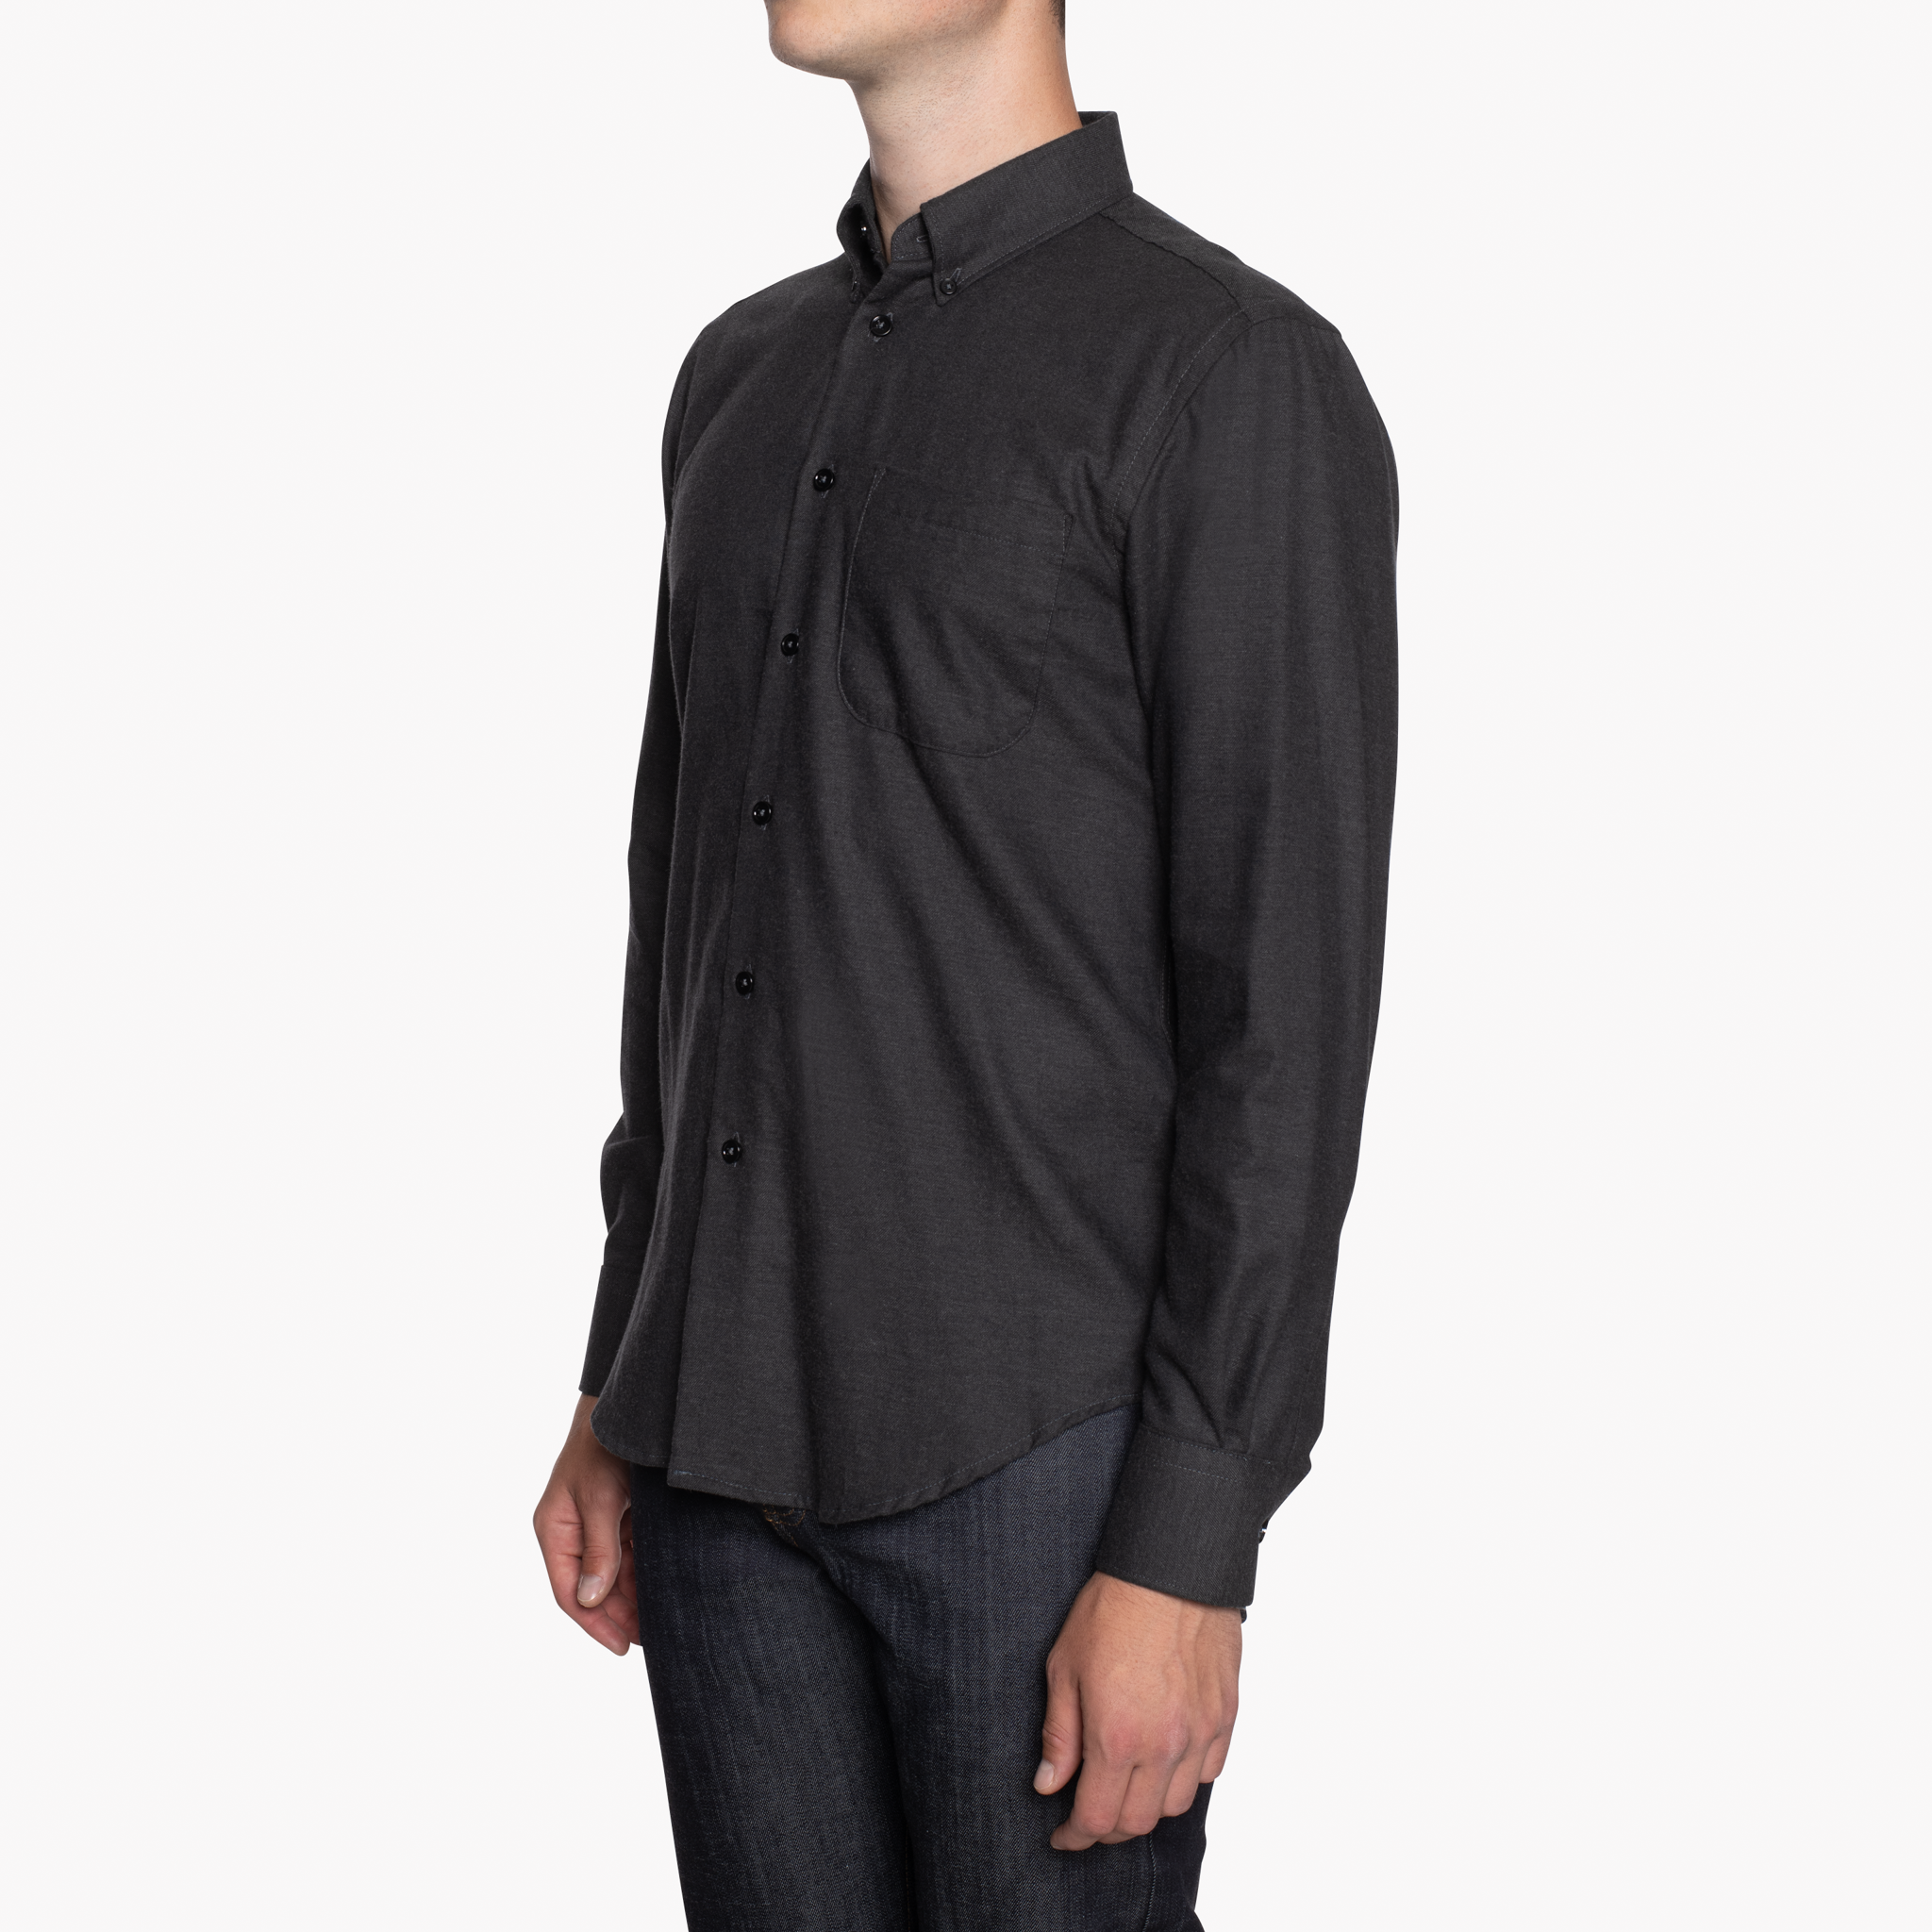  Easy Shirt - Soft Twill - Charcoal - side 